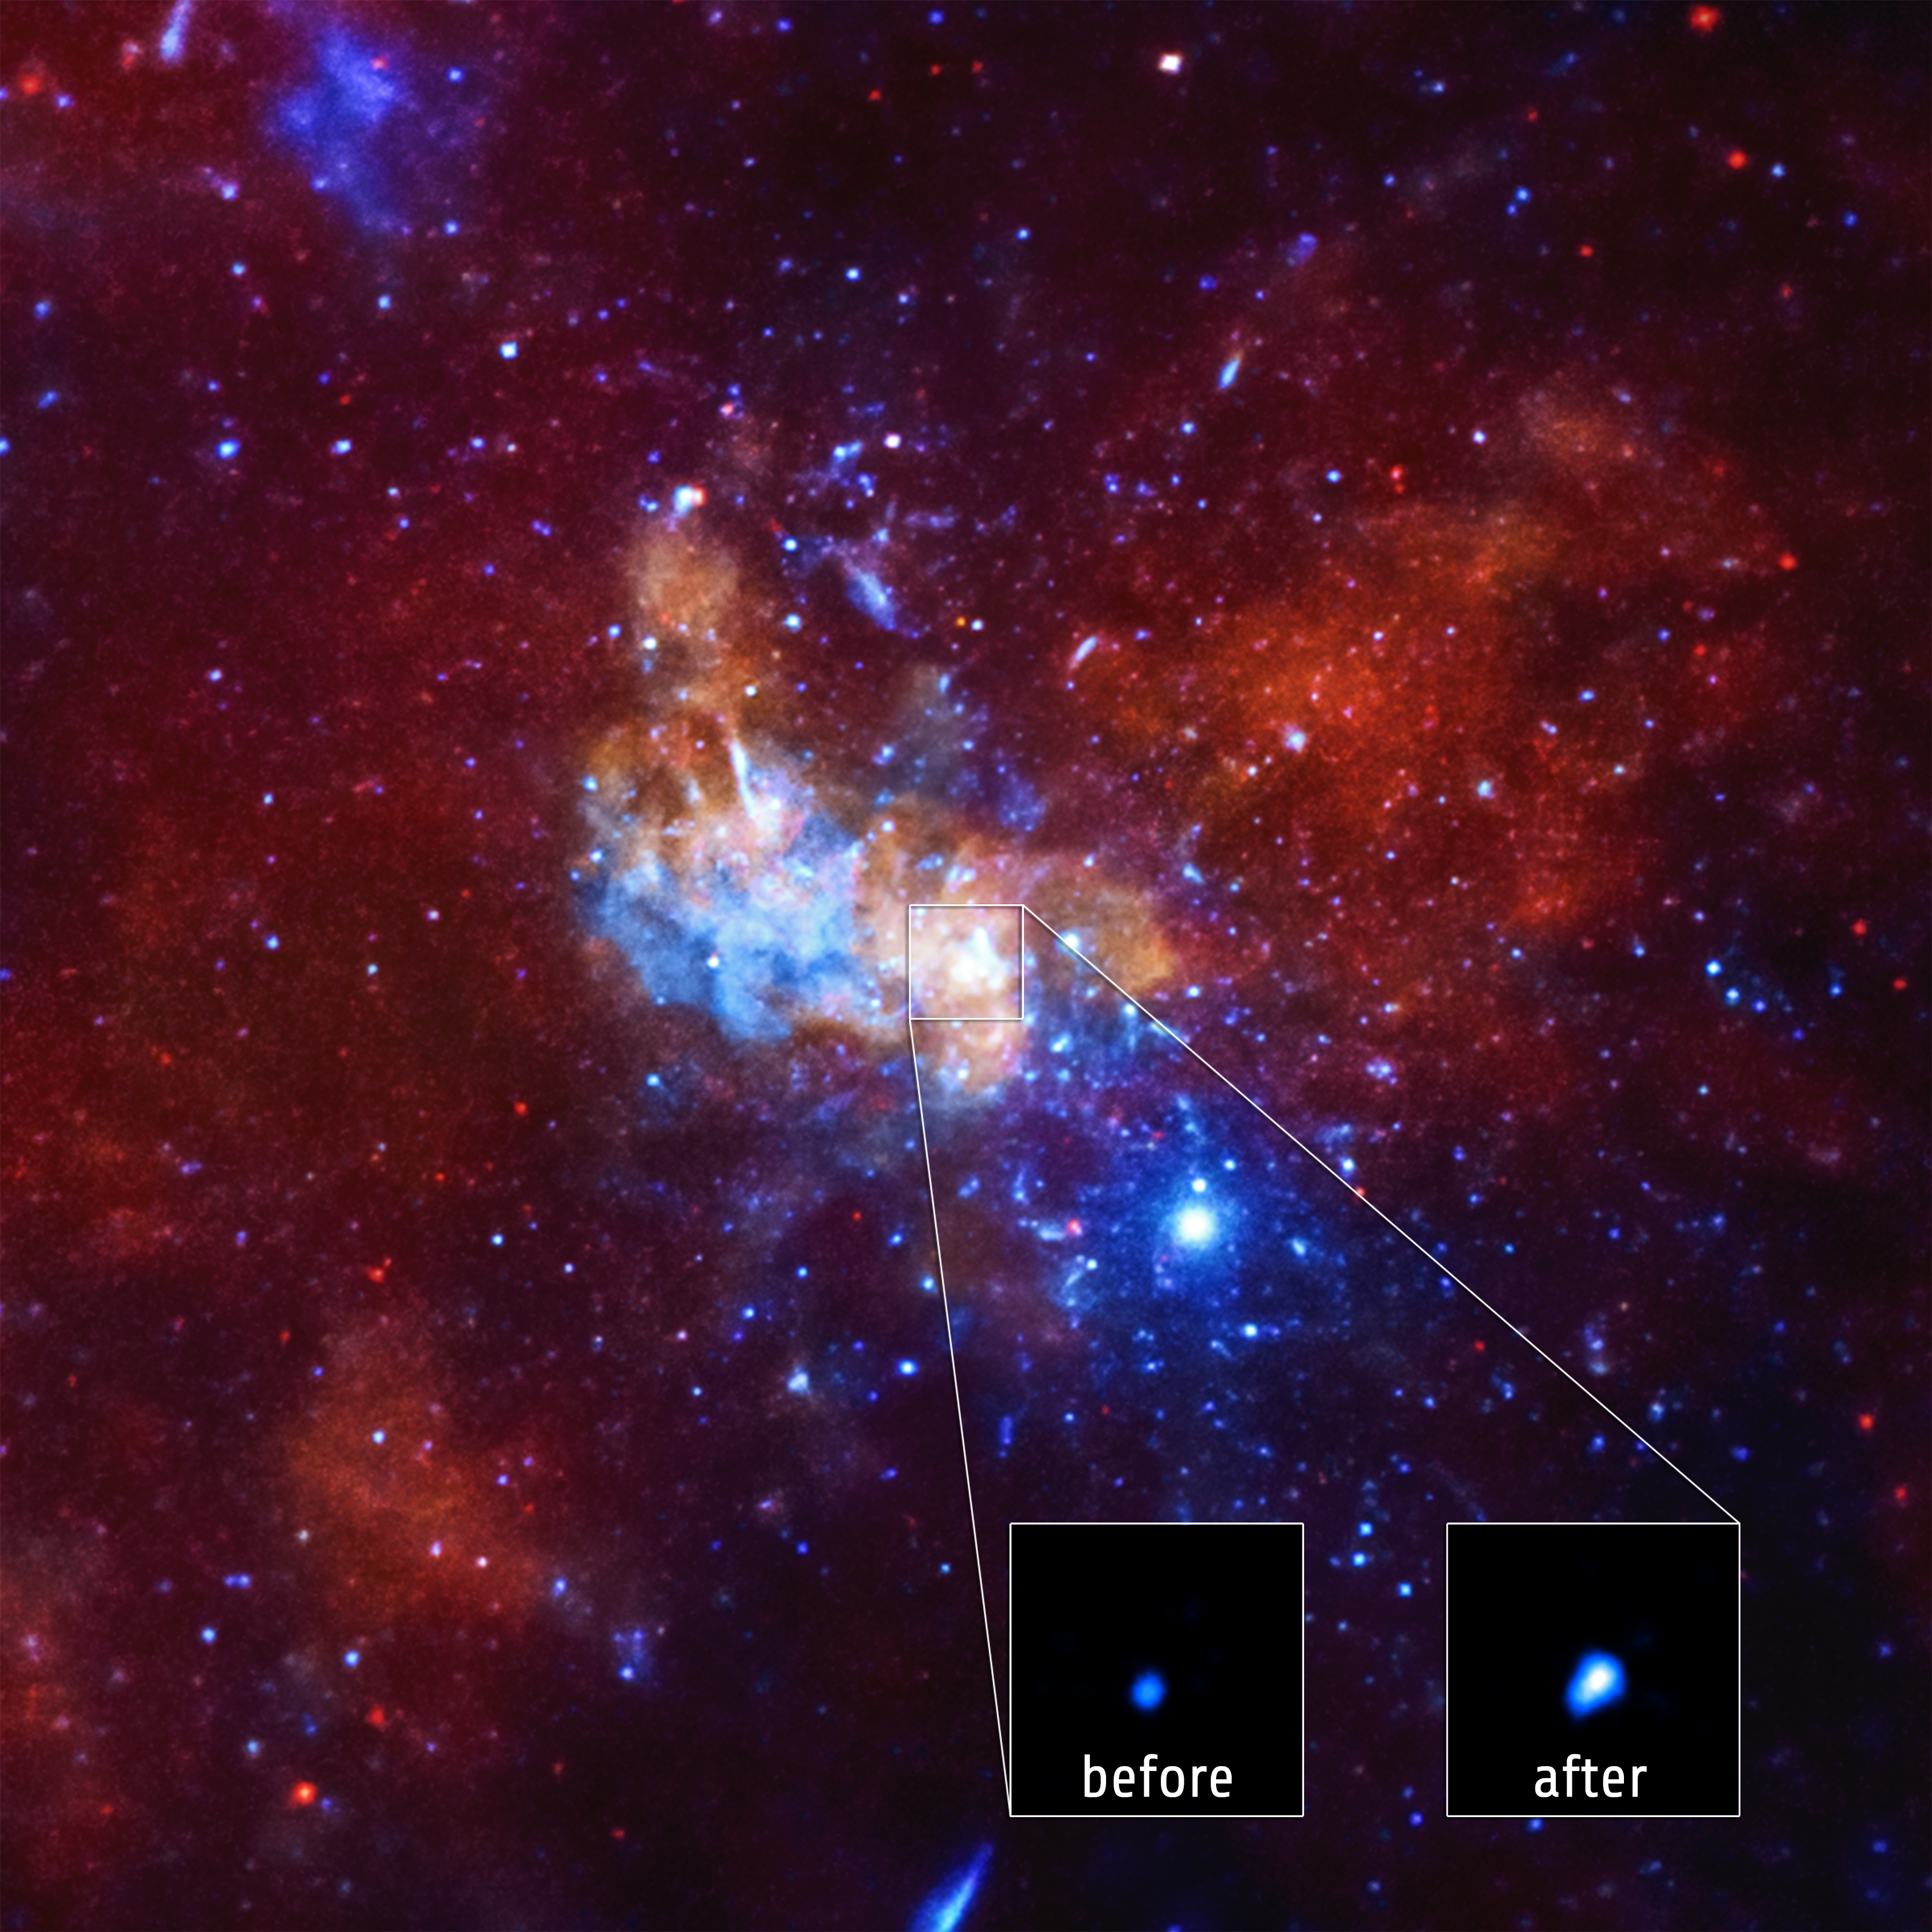 Image credit: NASA/CXC/Amherst College/D.Haggard et al., of the galactic center in X-rays. Sagittarius A* is the supermassive black hole at our Milky Way's center, which normally emits X-ray light of a particular brightness. However, 2013 saw a flare incr